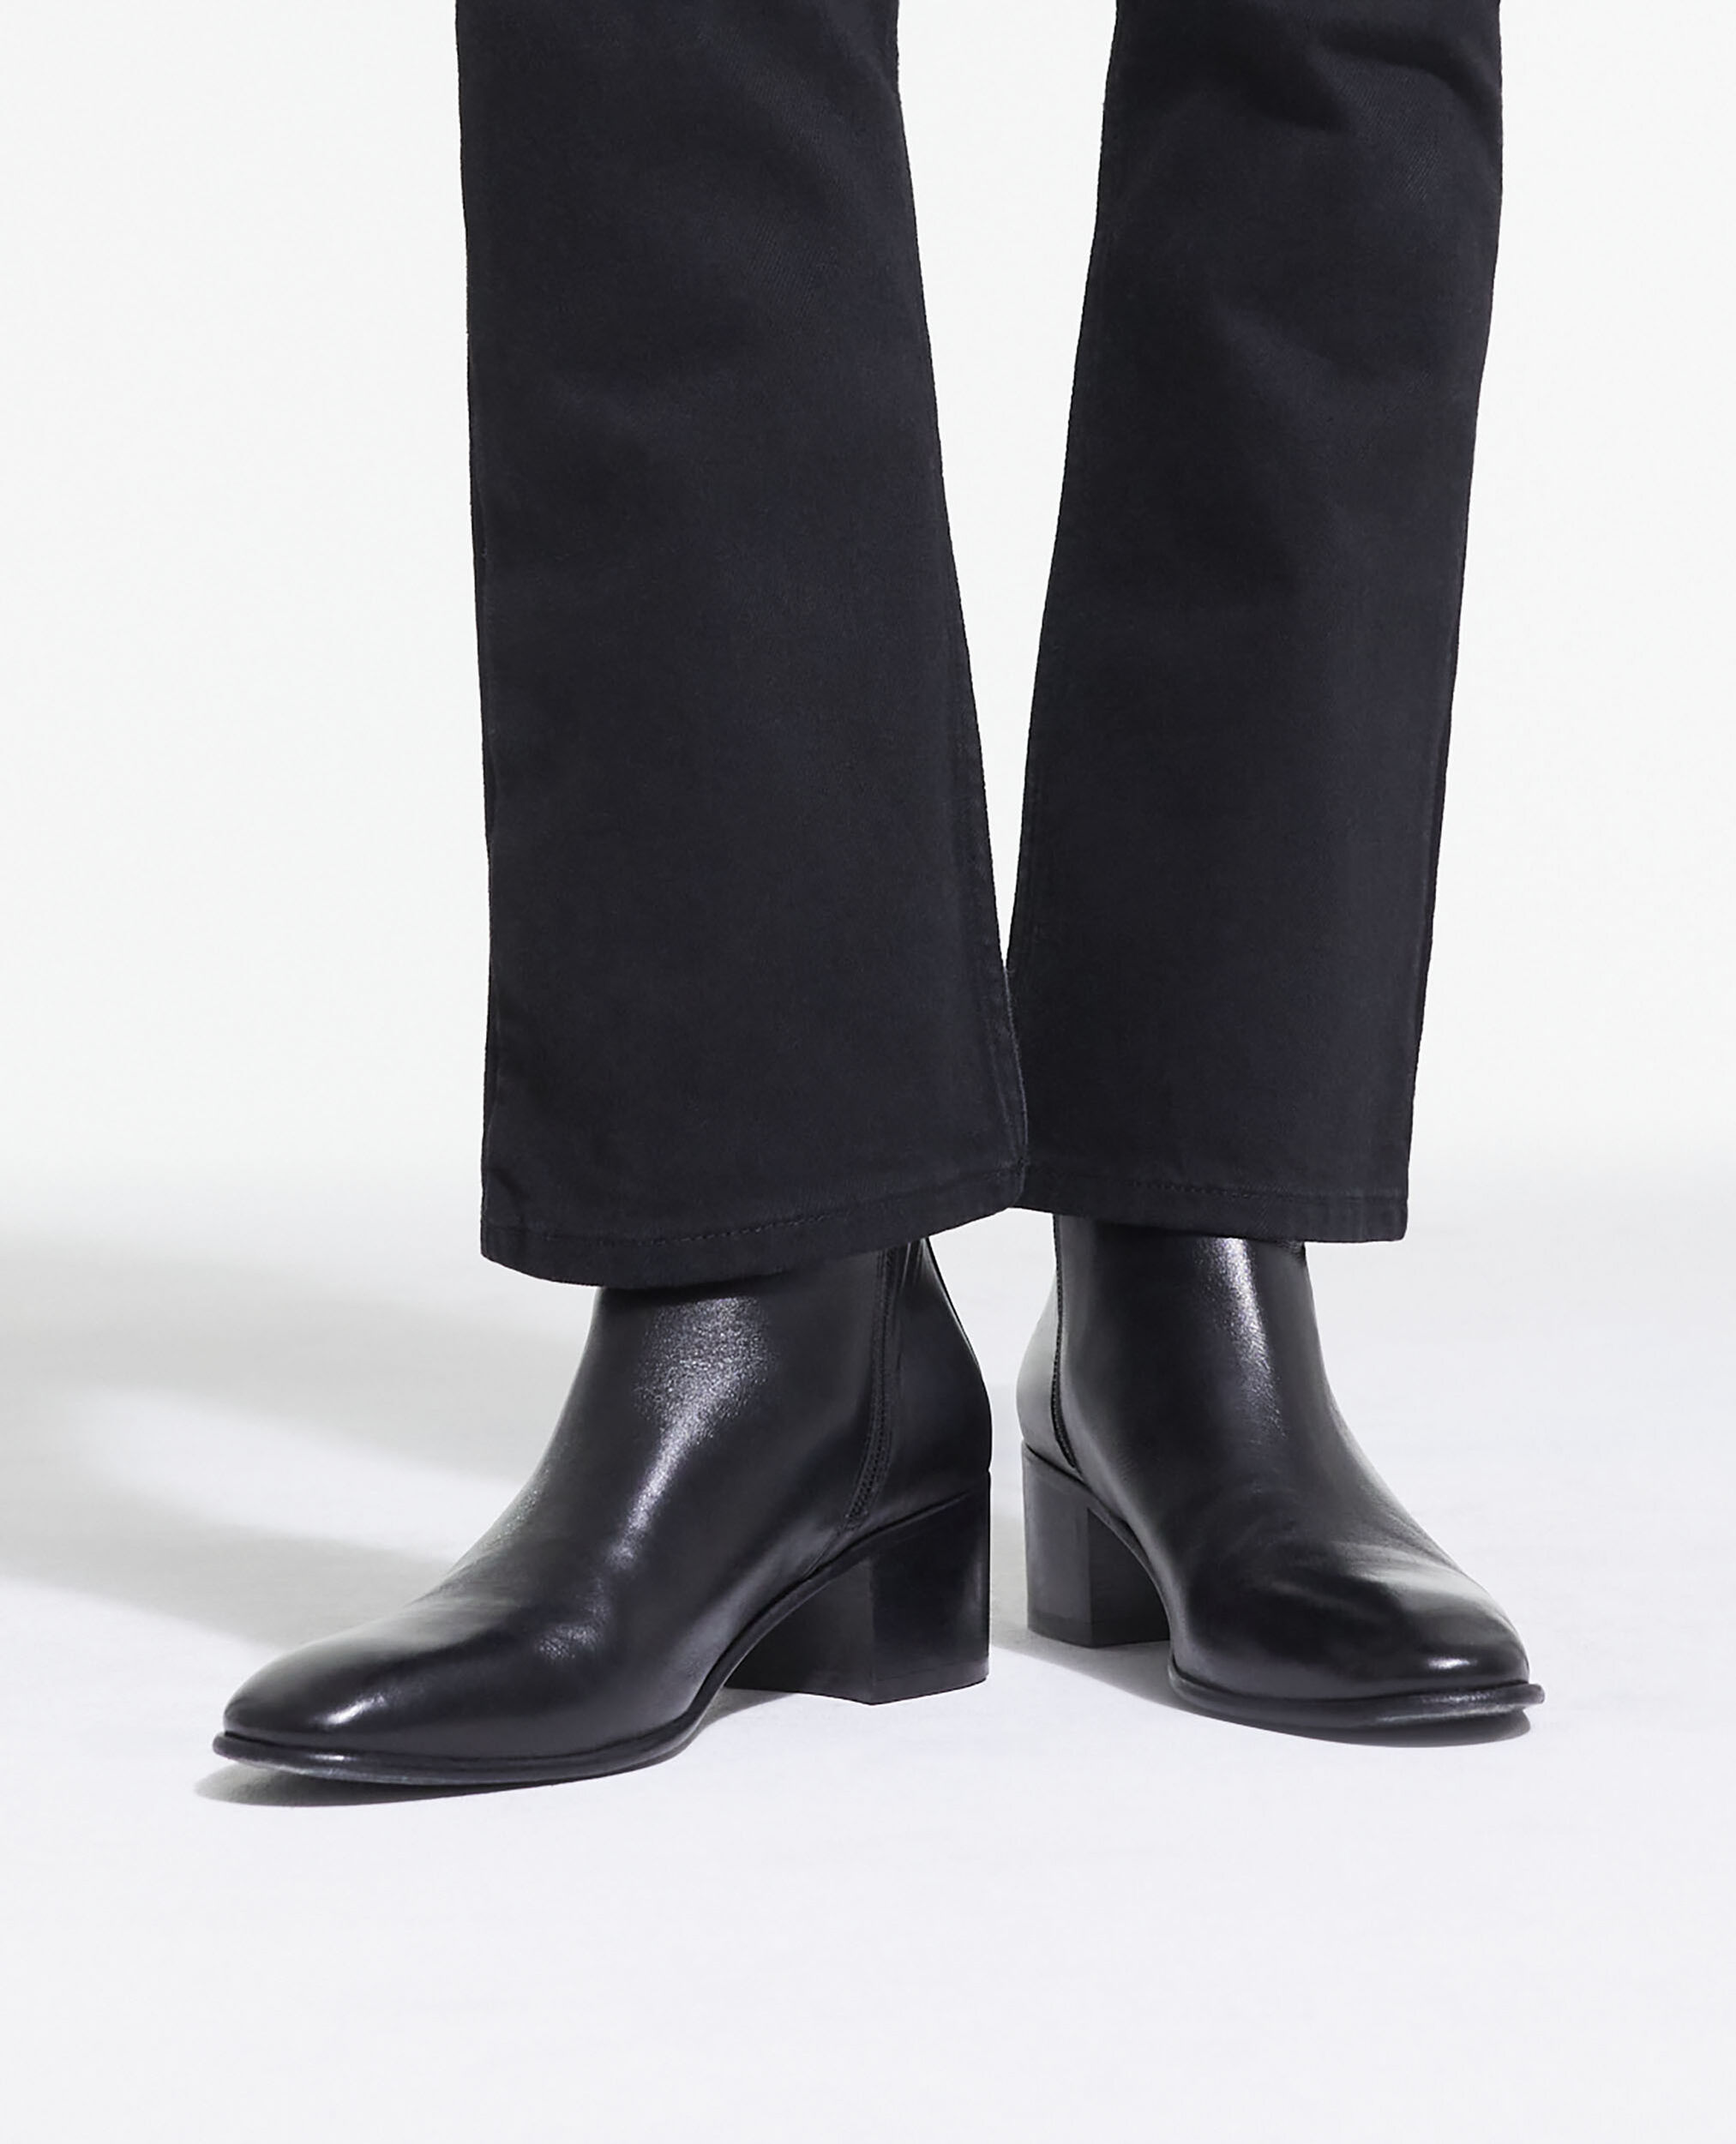 Black patent leather boots, BLACK, hi-res image number null